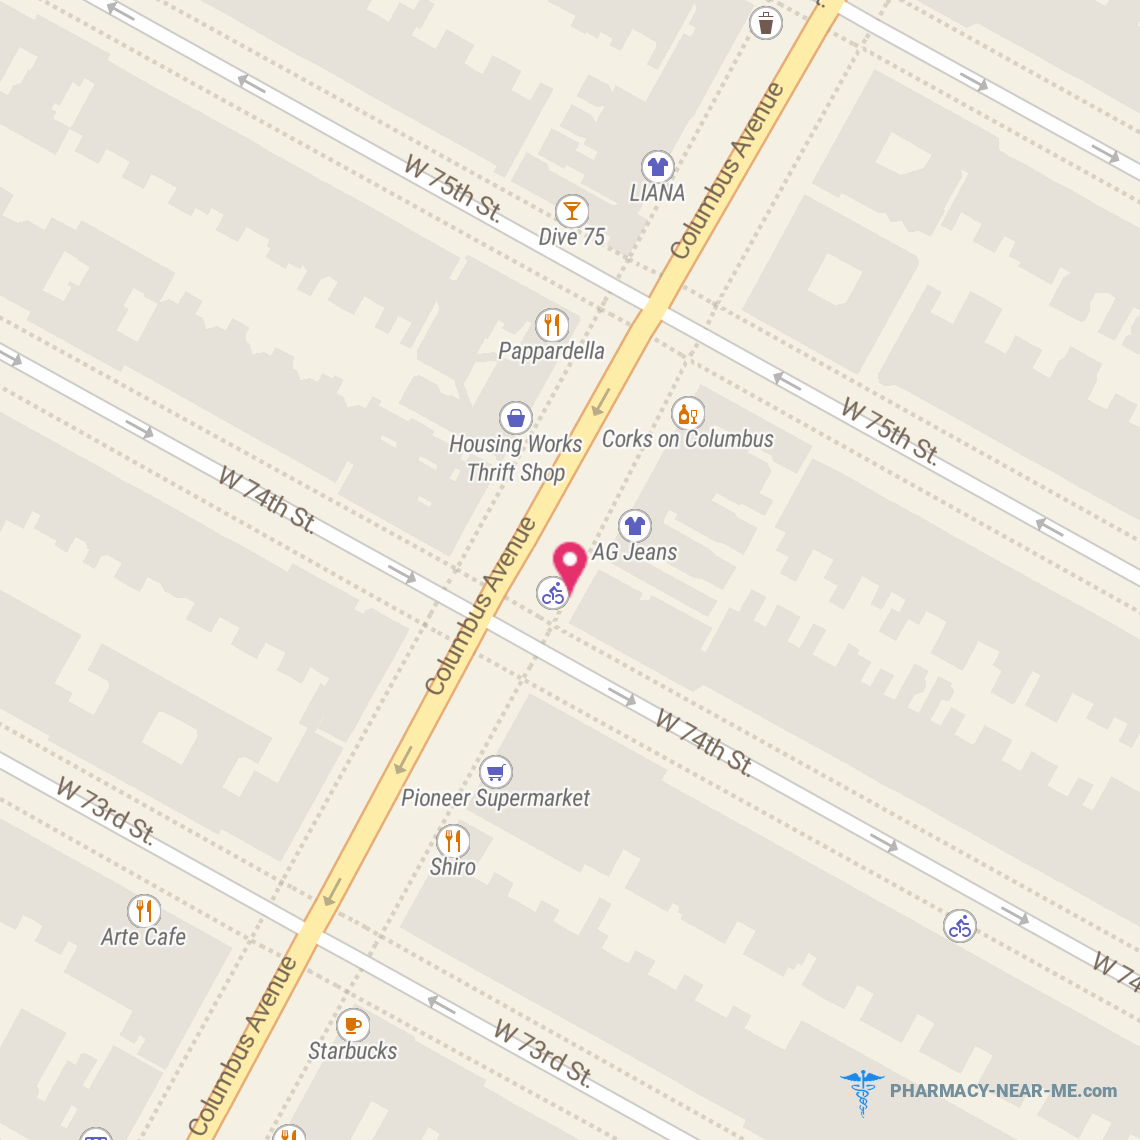 DUANE READE #14414 - Pharmacy Hours, Phone, Reviews & Information: 325 Columbus Avenue, NY, New York 10023, United States